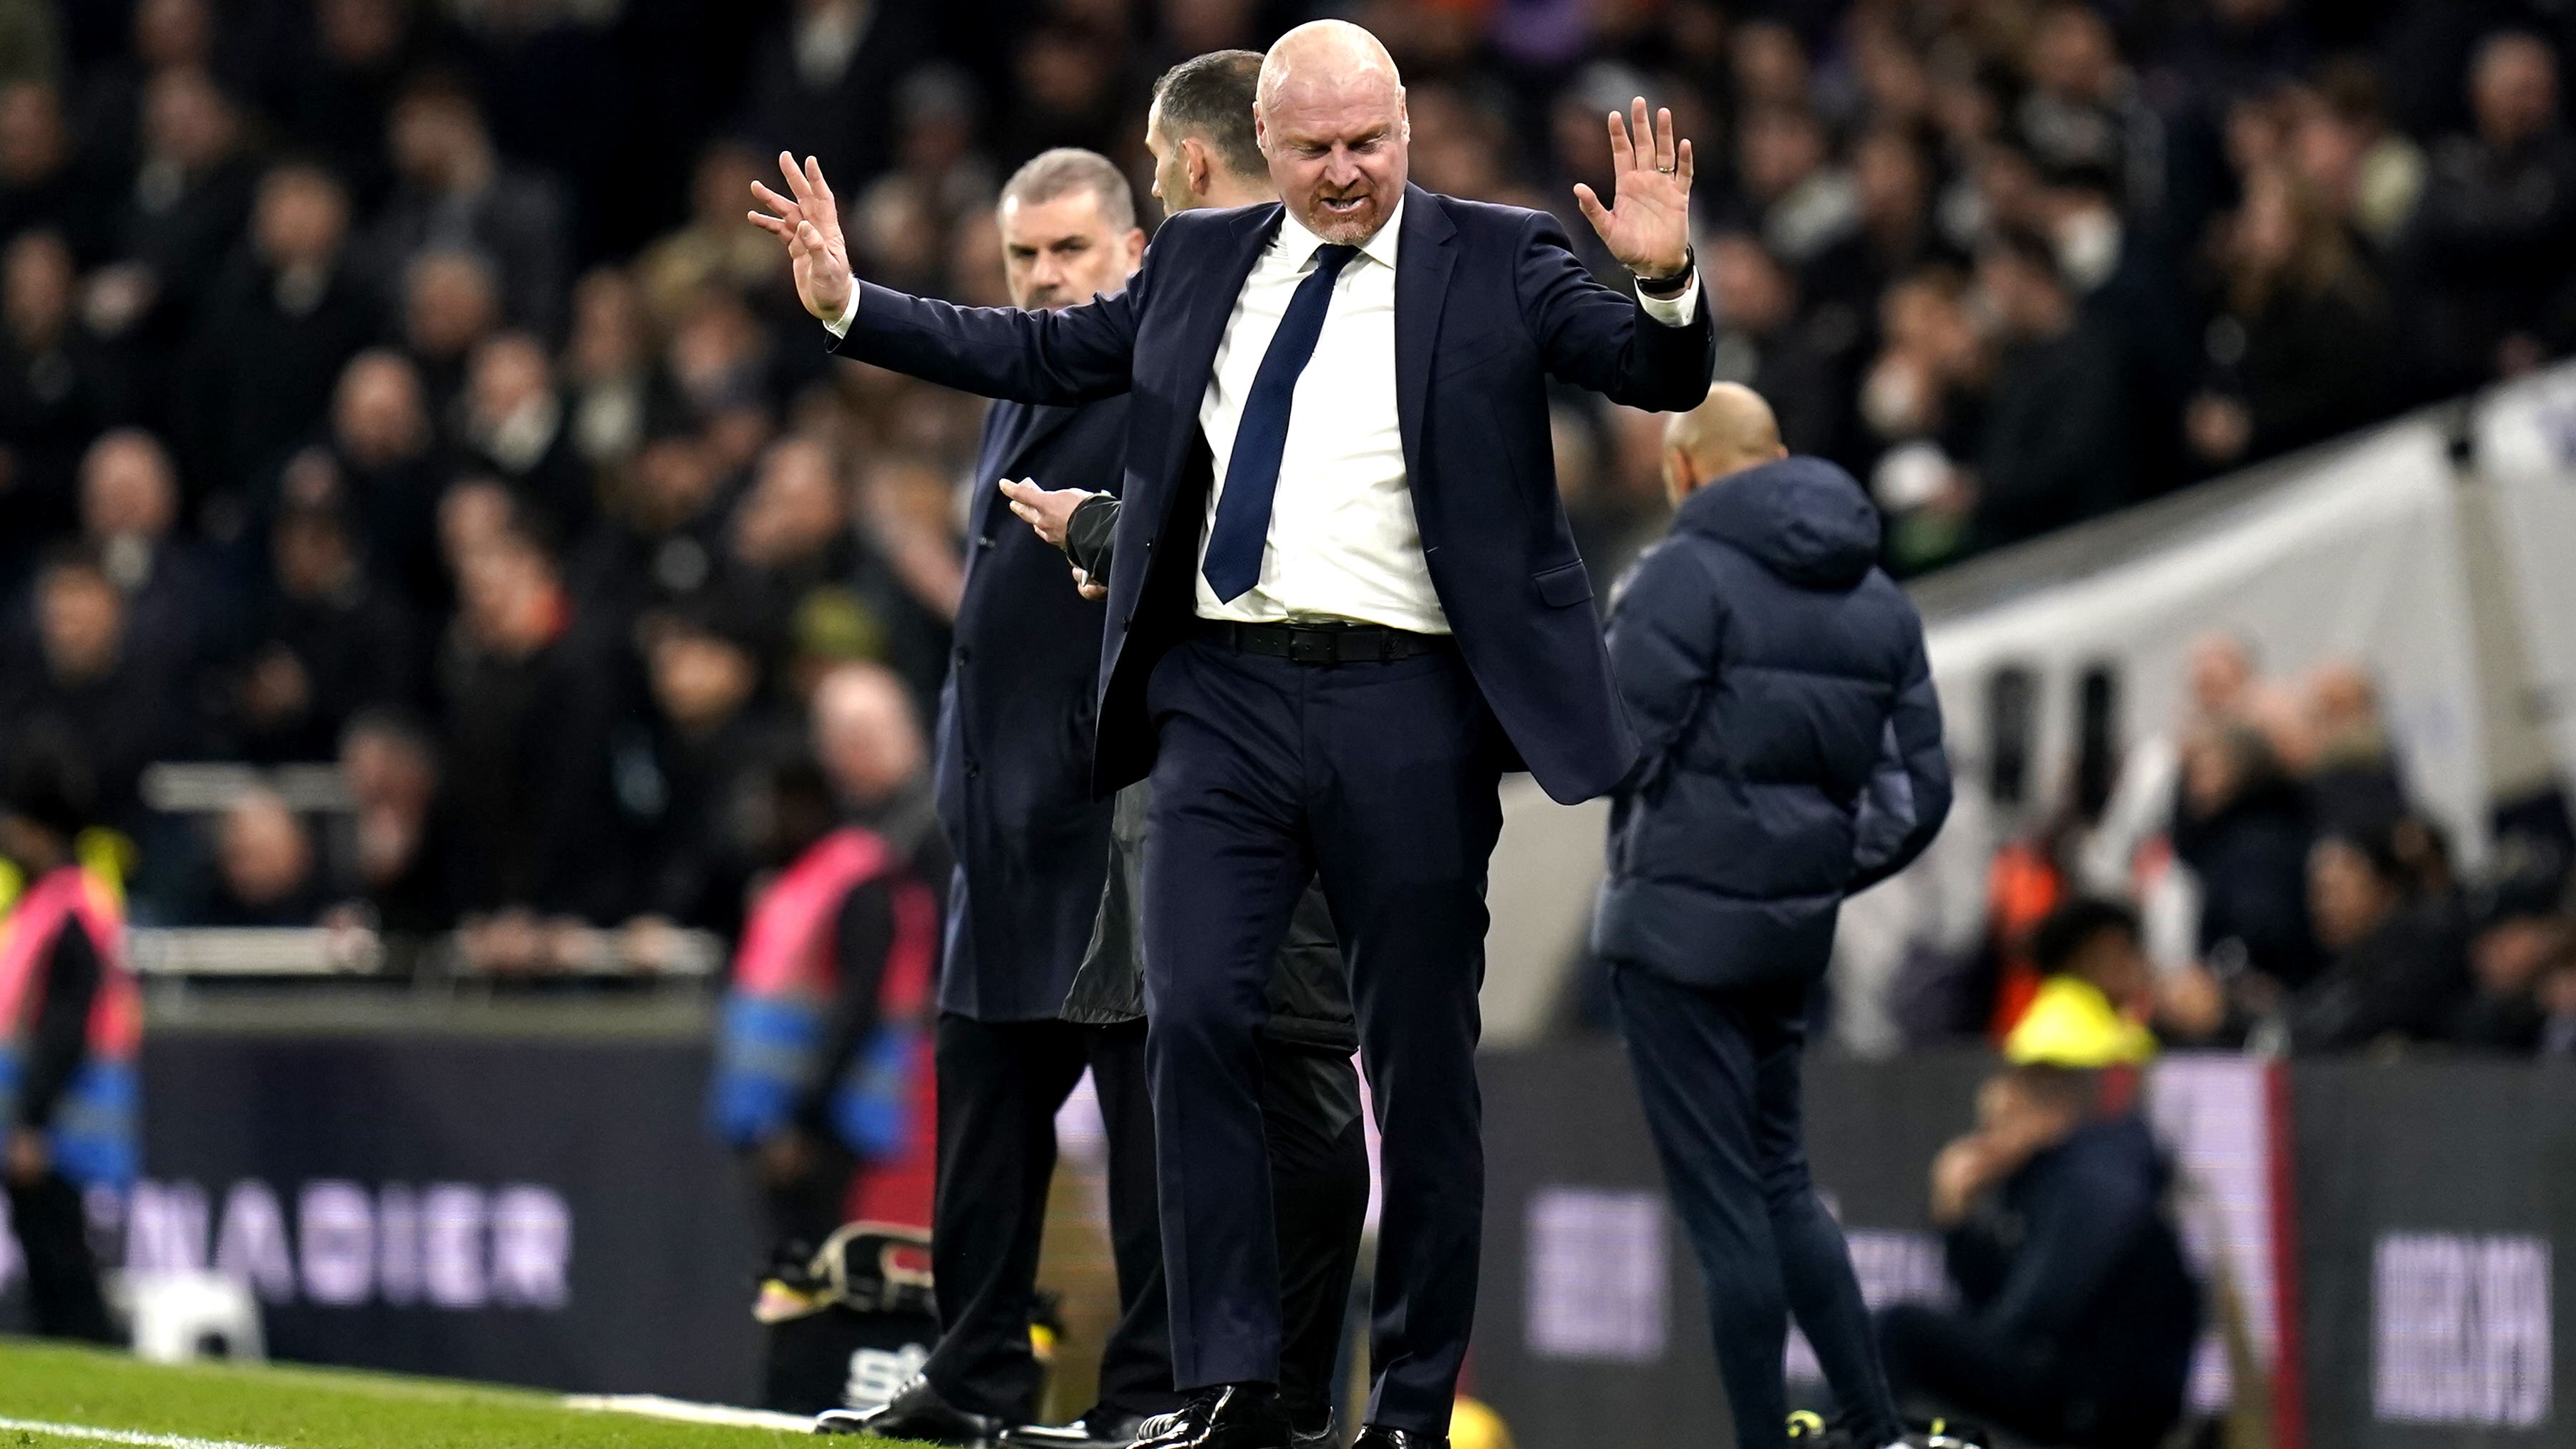 VAR ‘over-reffed the moment’ – Sean Dyche unhappy with disallowed Everton goal